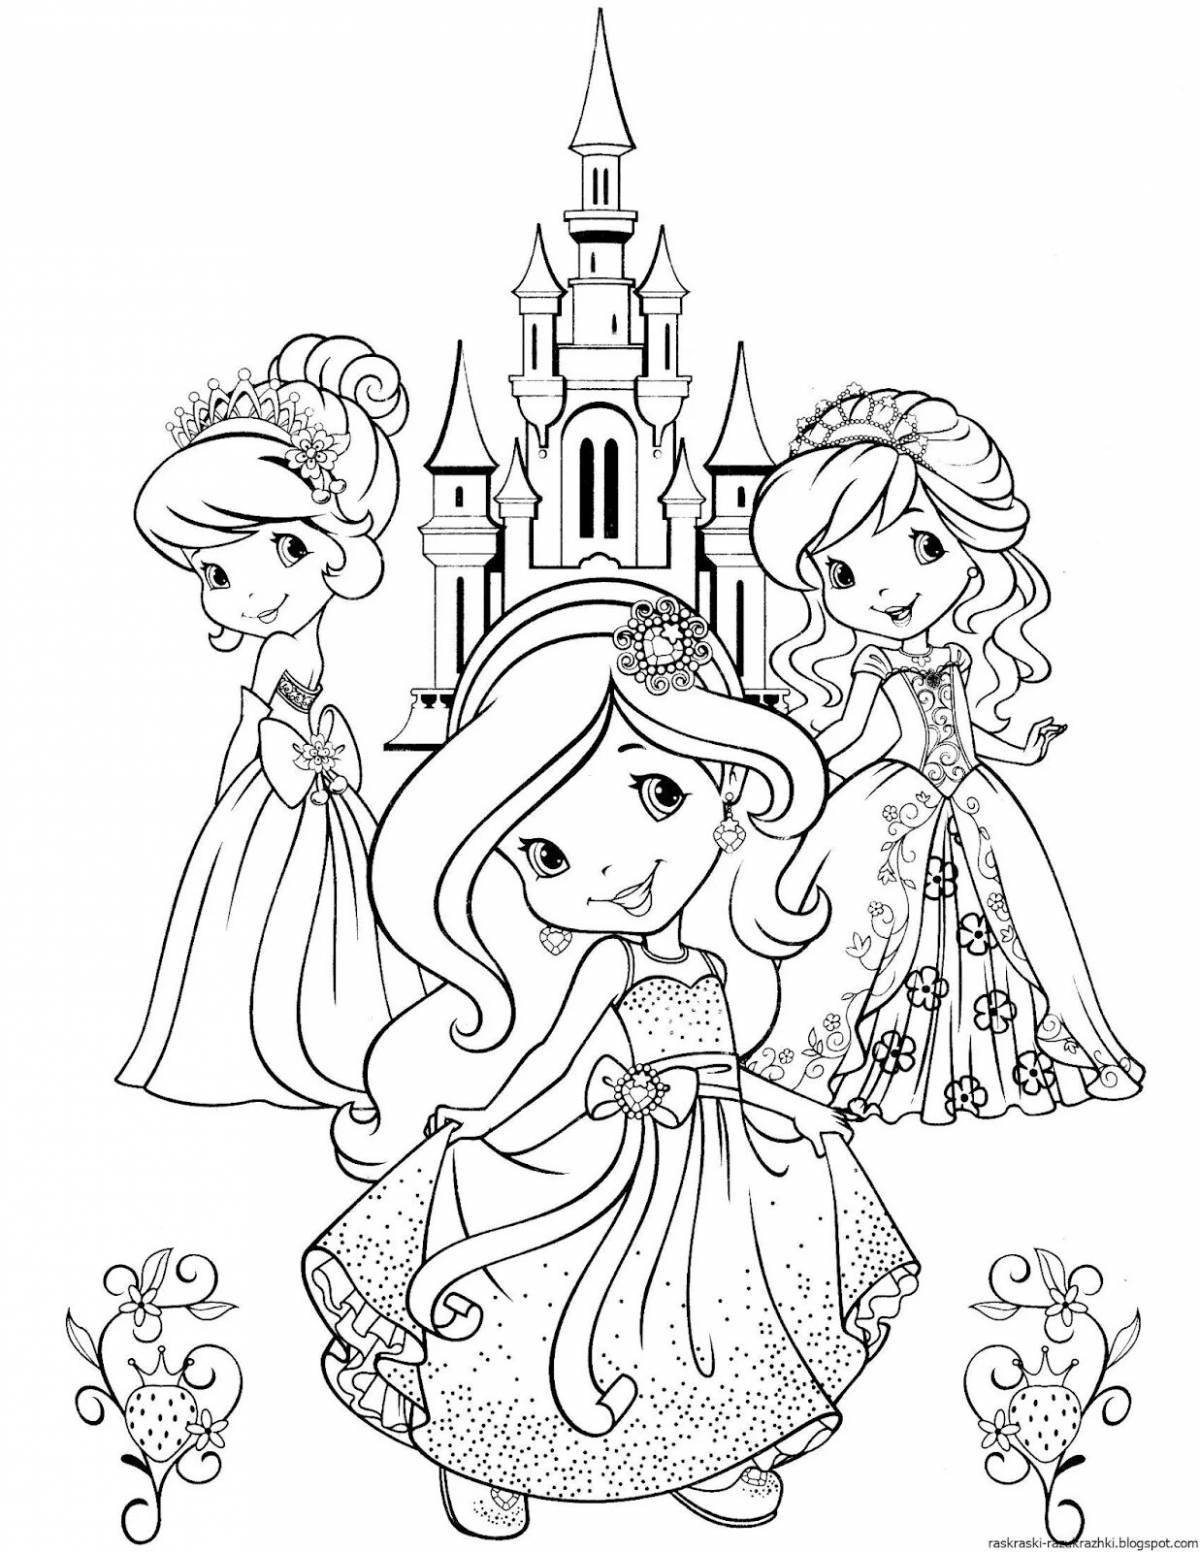 Exquisite coloring book for princess girls 5-6 years old